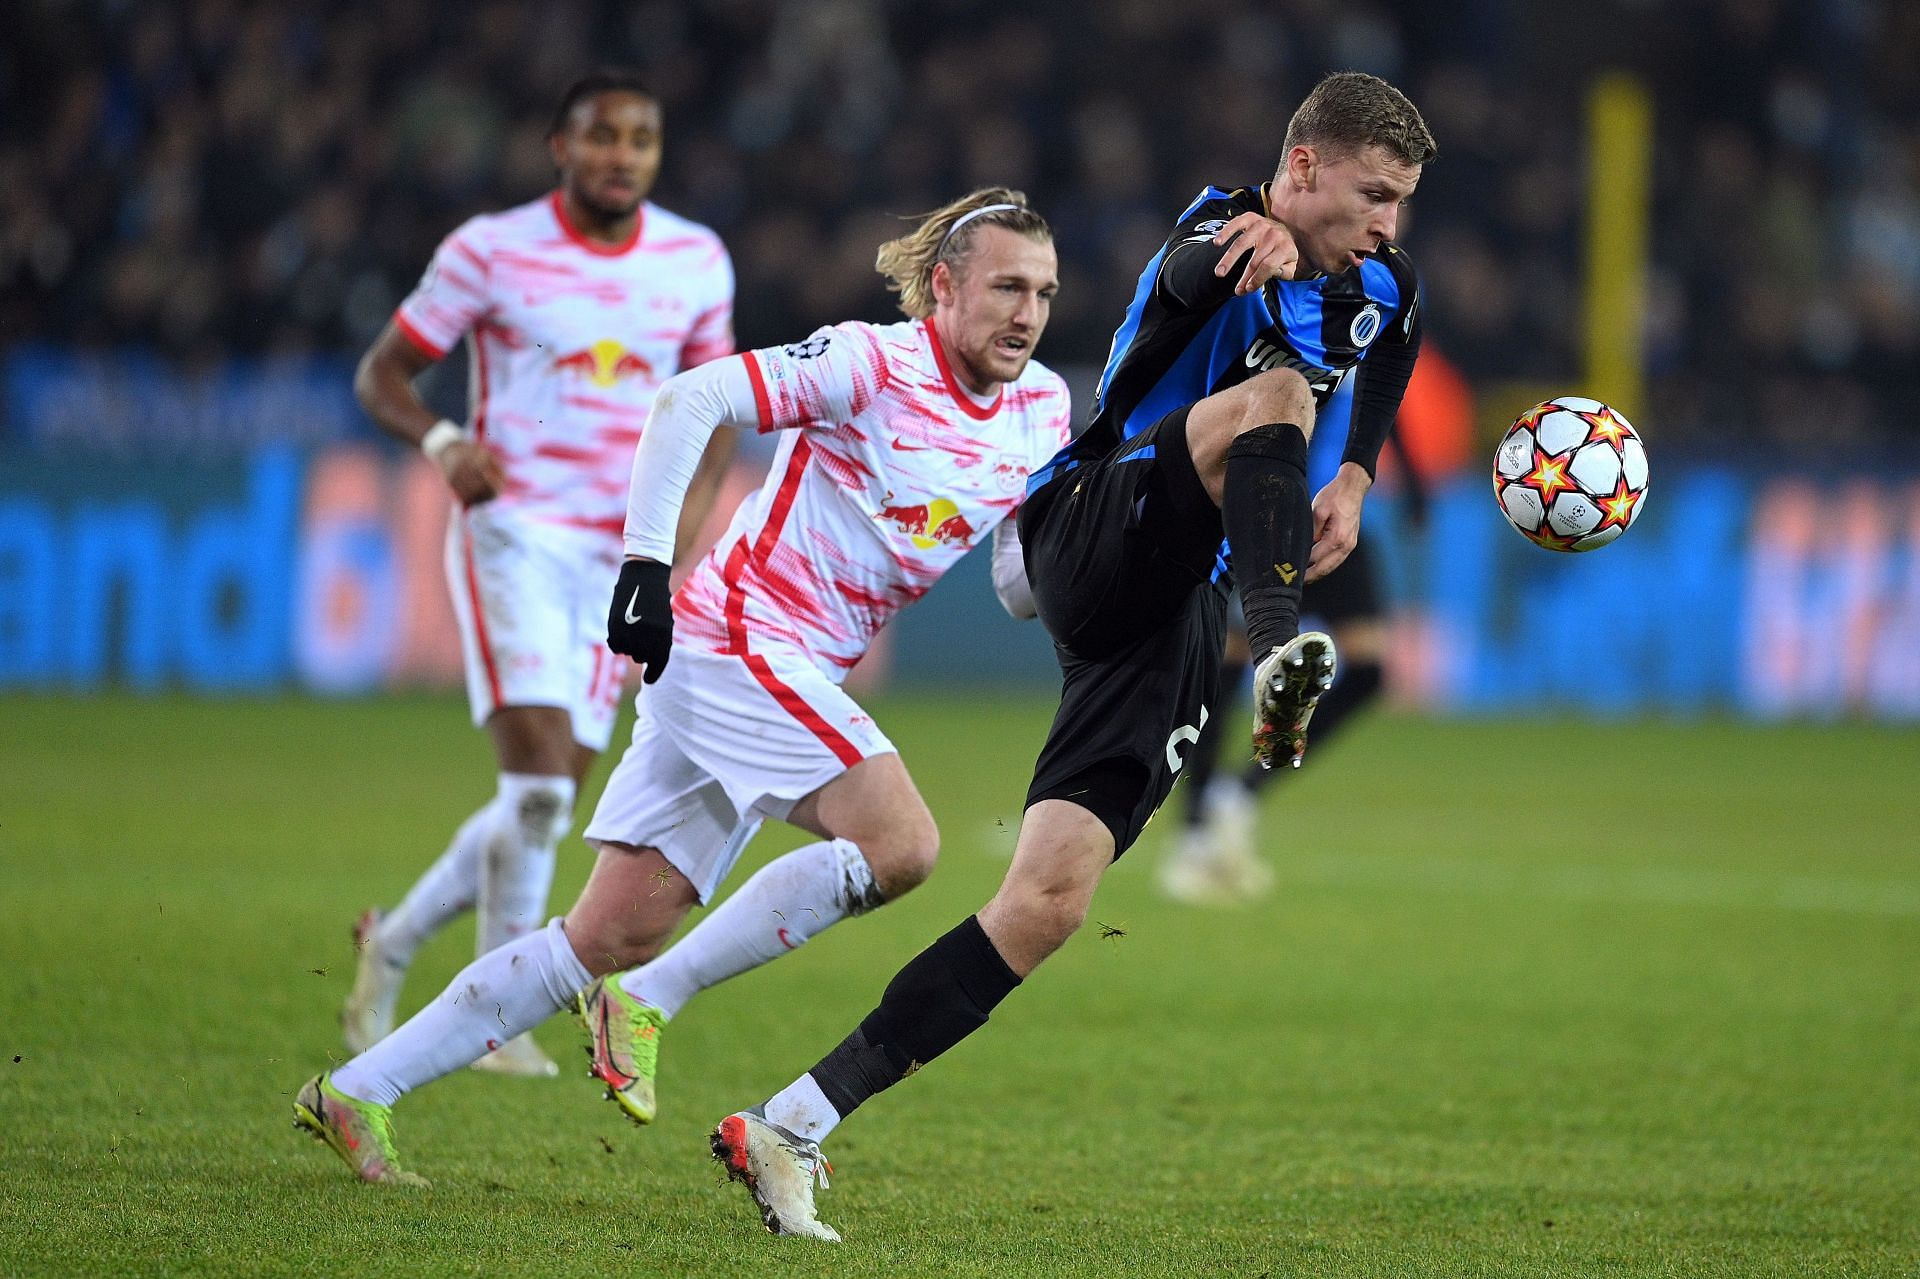 A draw will be enough ofr Club Brugge to seal the Belgian championship